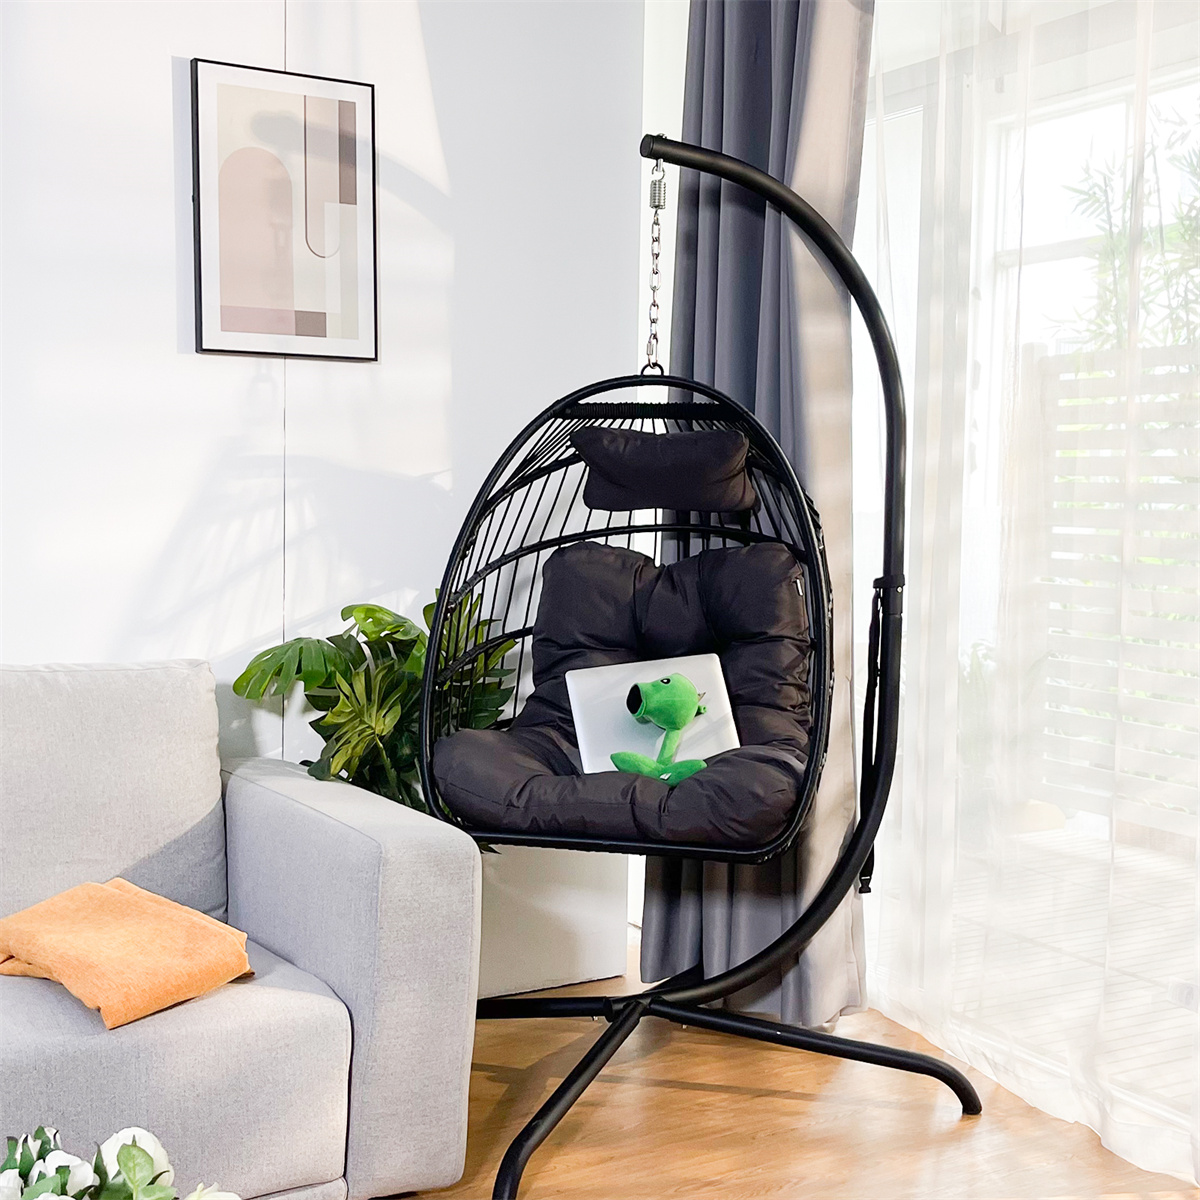 ARCTICSCORPION Black Swing Egg Chair with Stand, Indoor Outdoor Wicker Rattan Patio Basket Hanging Chair with C Type Bracket, Hammock Chair with Cushion and Pillow, Wicker Folding Hanging Chair - image 3 of 7